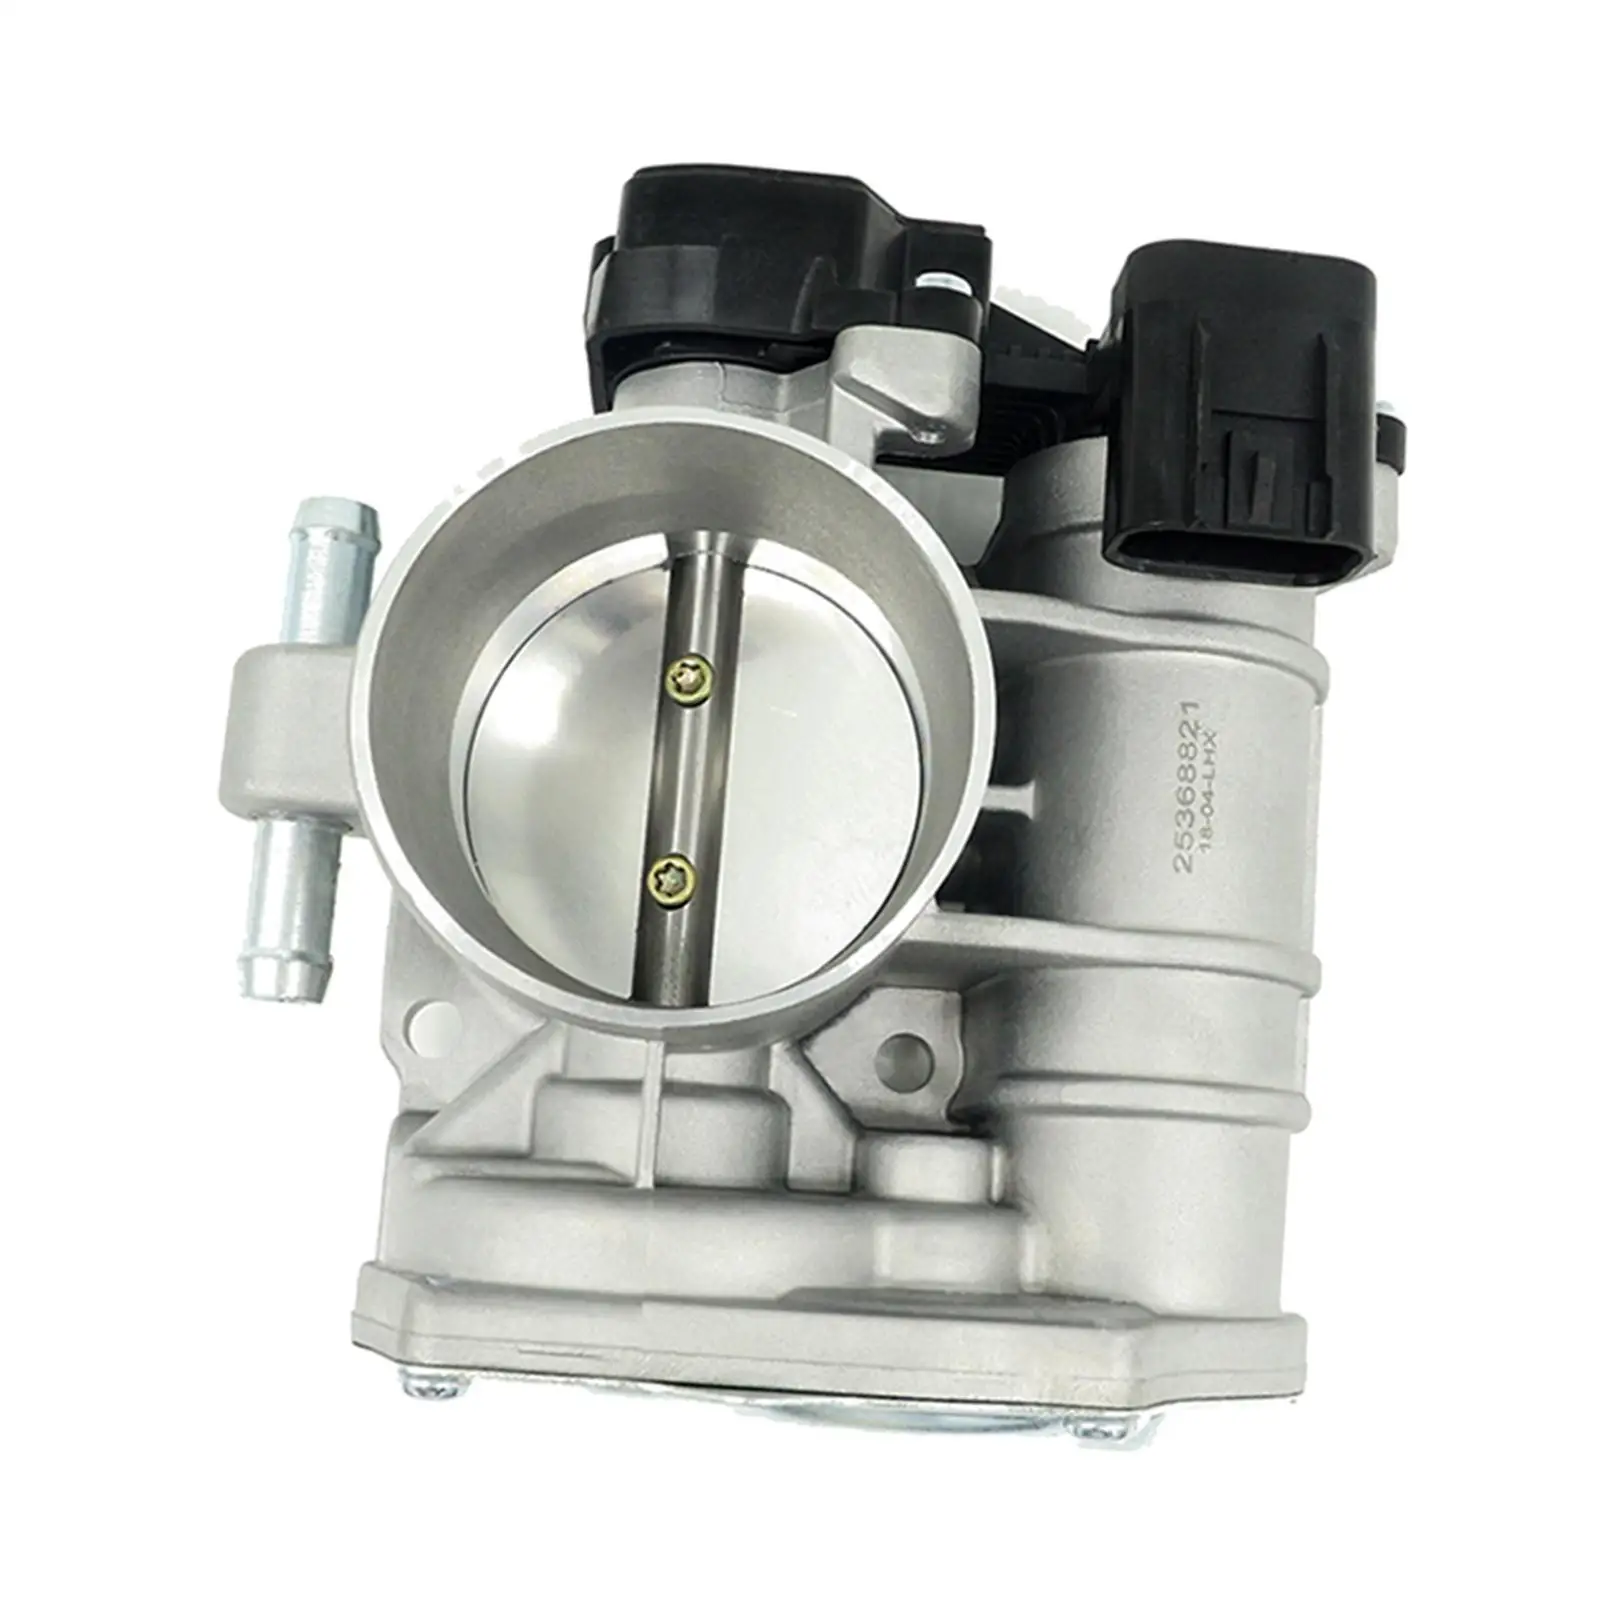 25368821 Electronic Throttle Body Fit for Suzuki  Reno I4 2.0L 06-08 Accessories High Performance